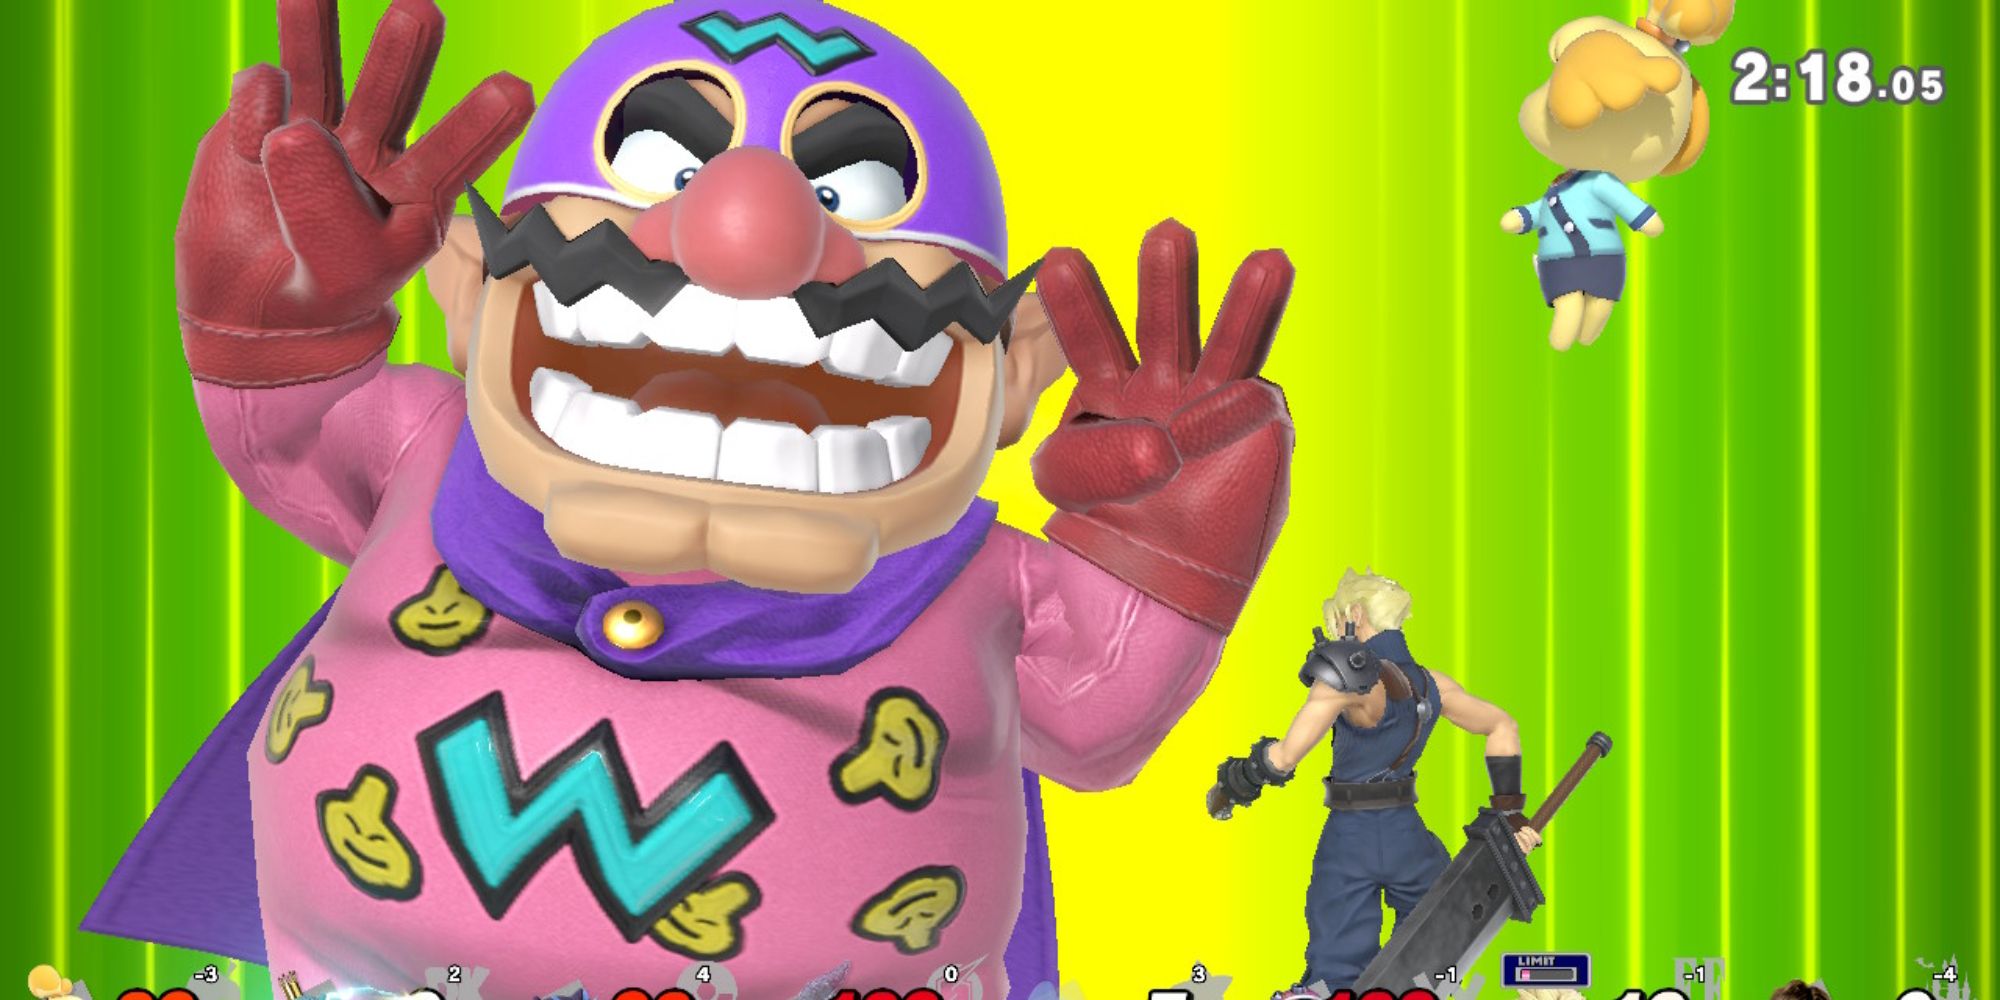 Wario Man flashing a W sign in front of Cloud and Isabelle